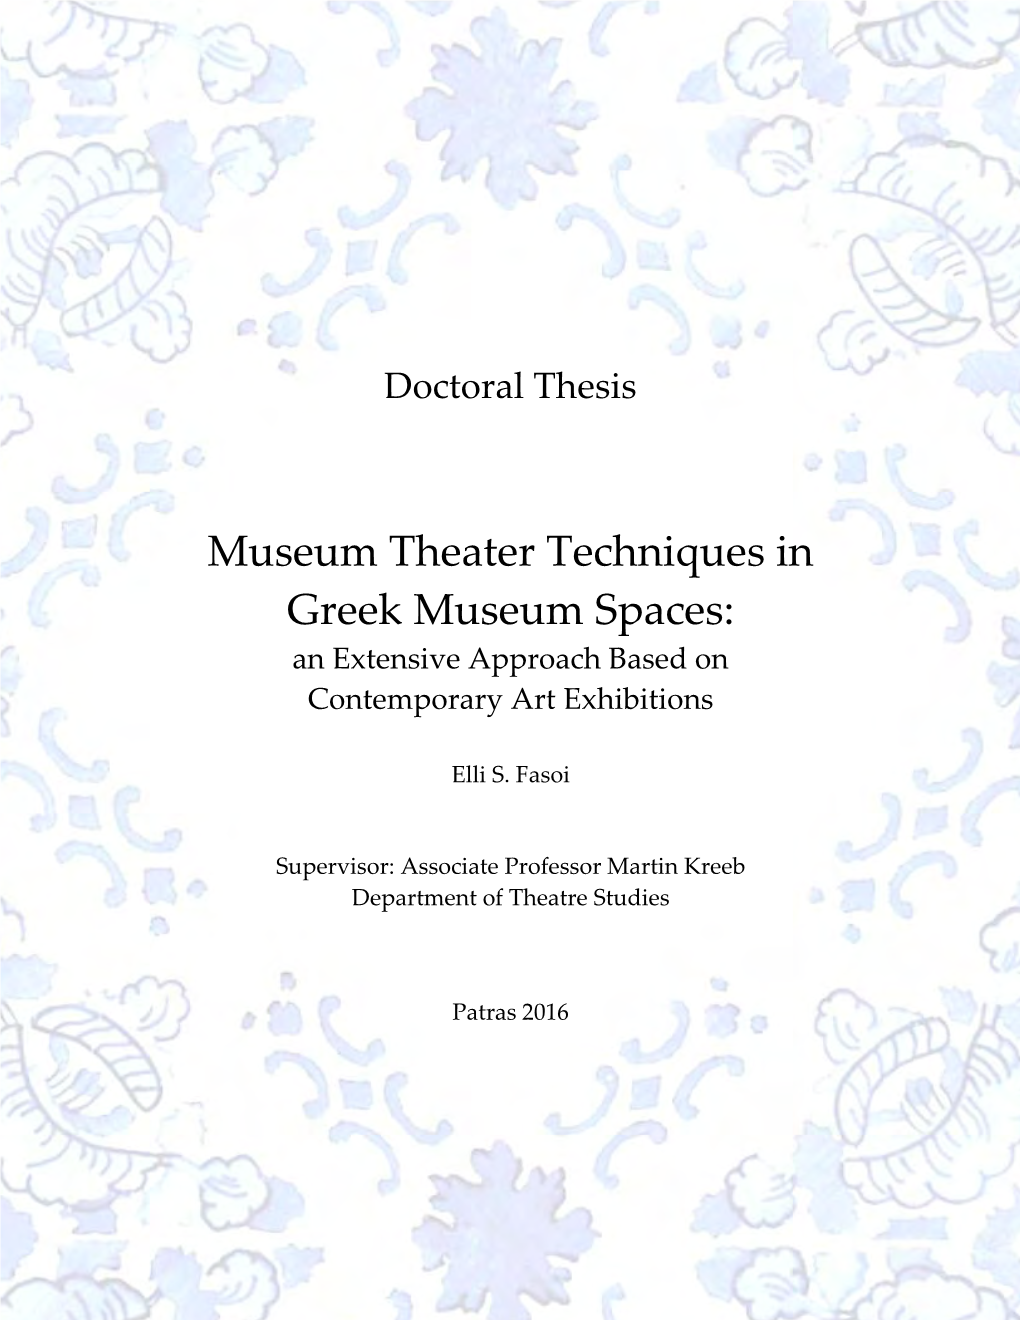 The Application of Museum Theater Techniques in Greek Museums: An